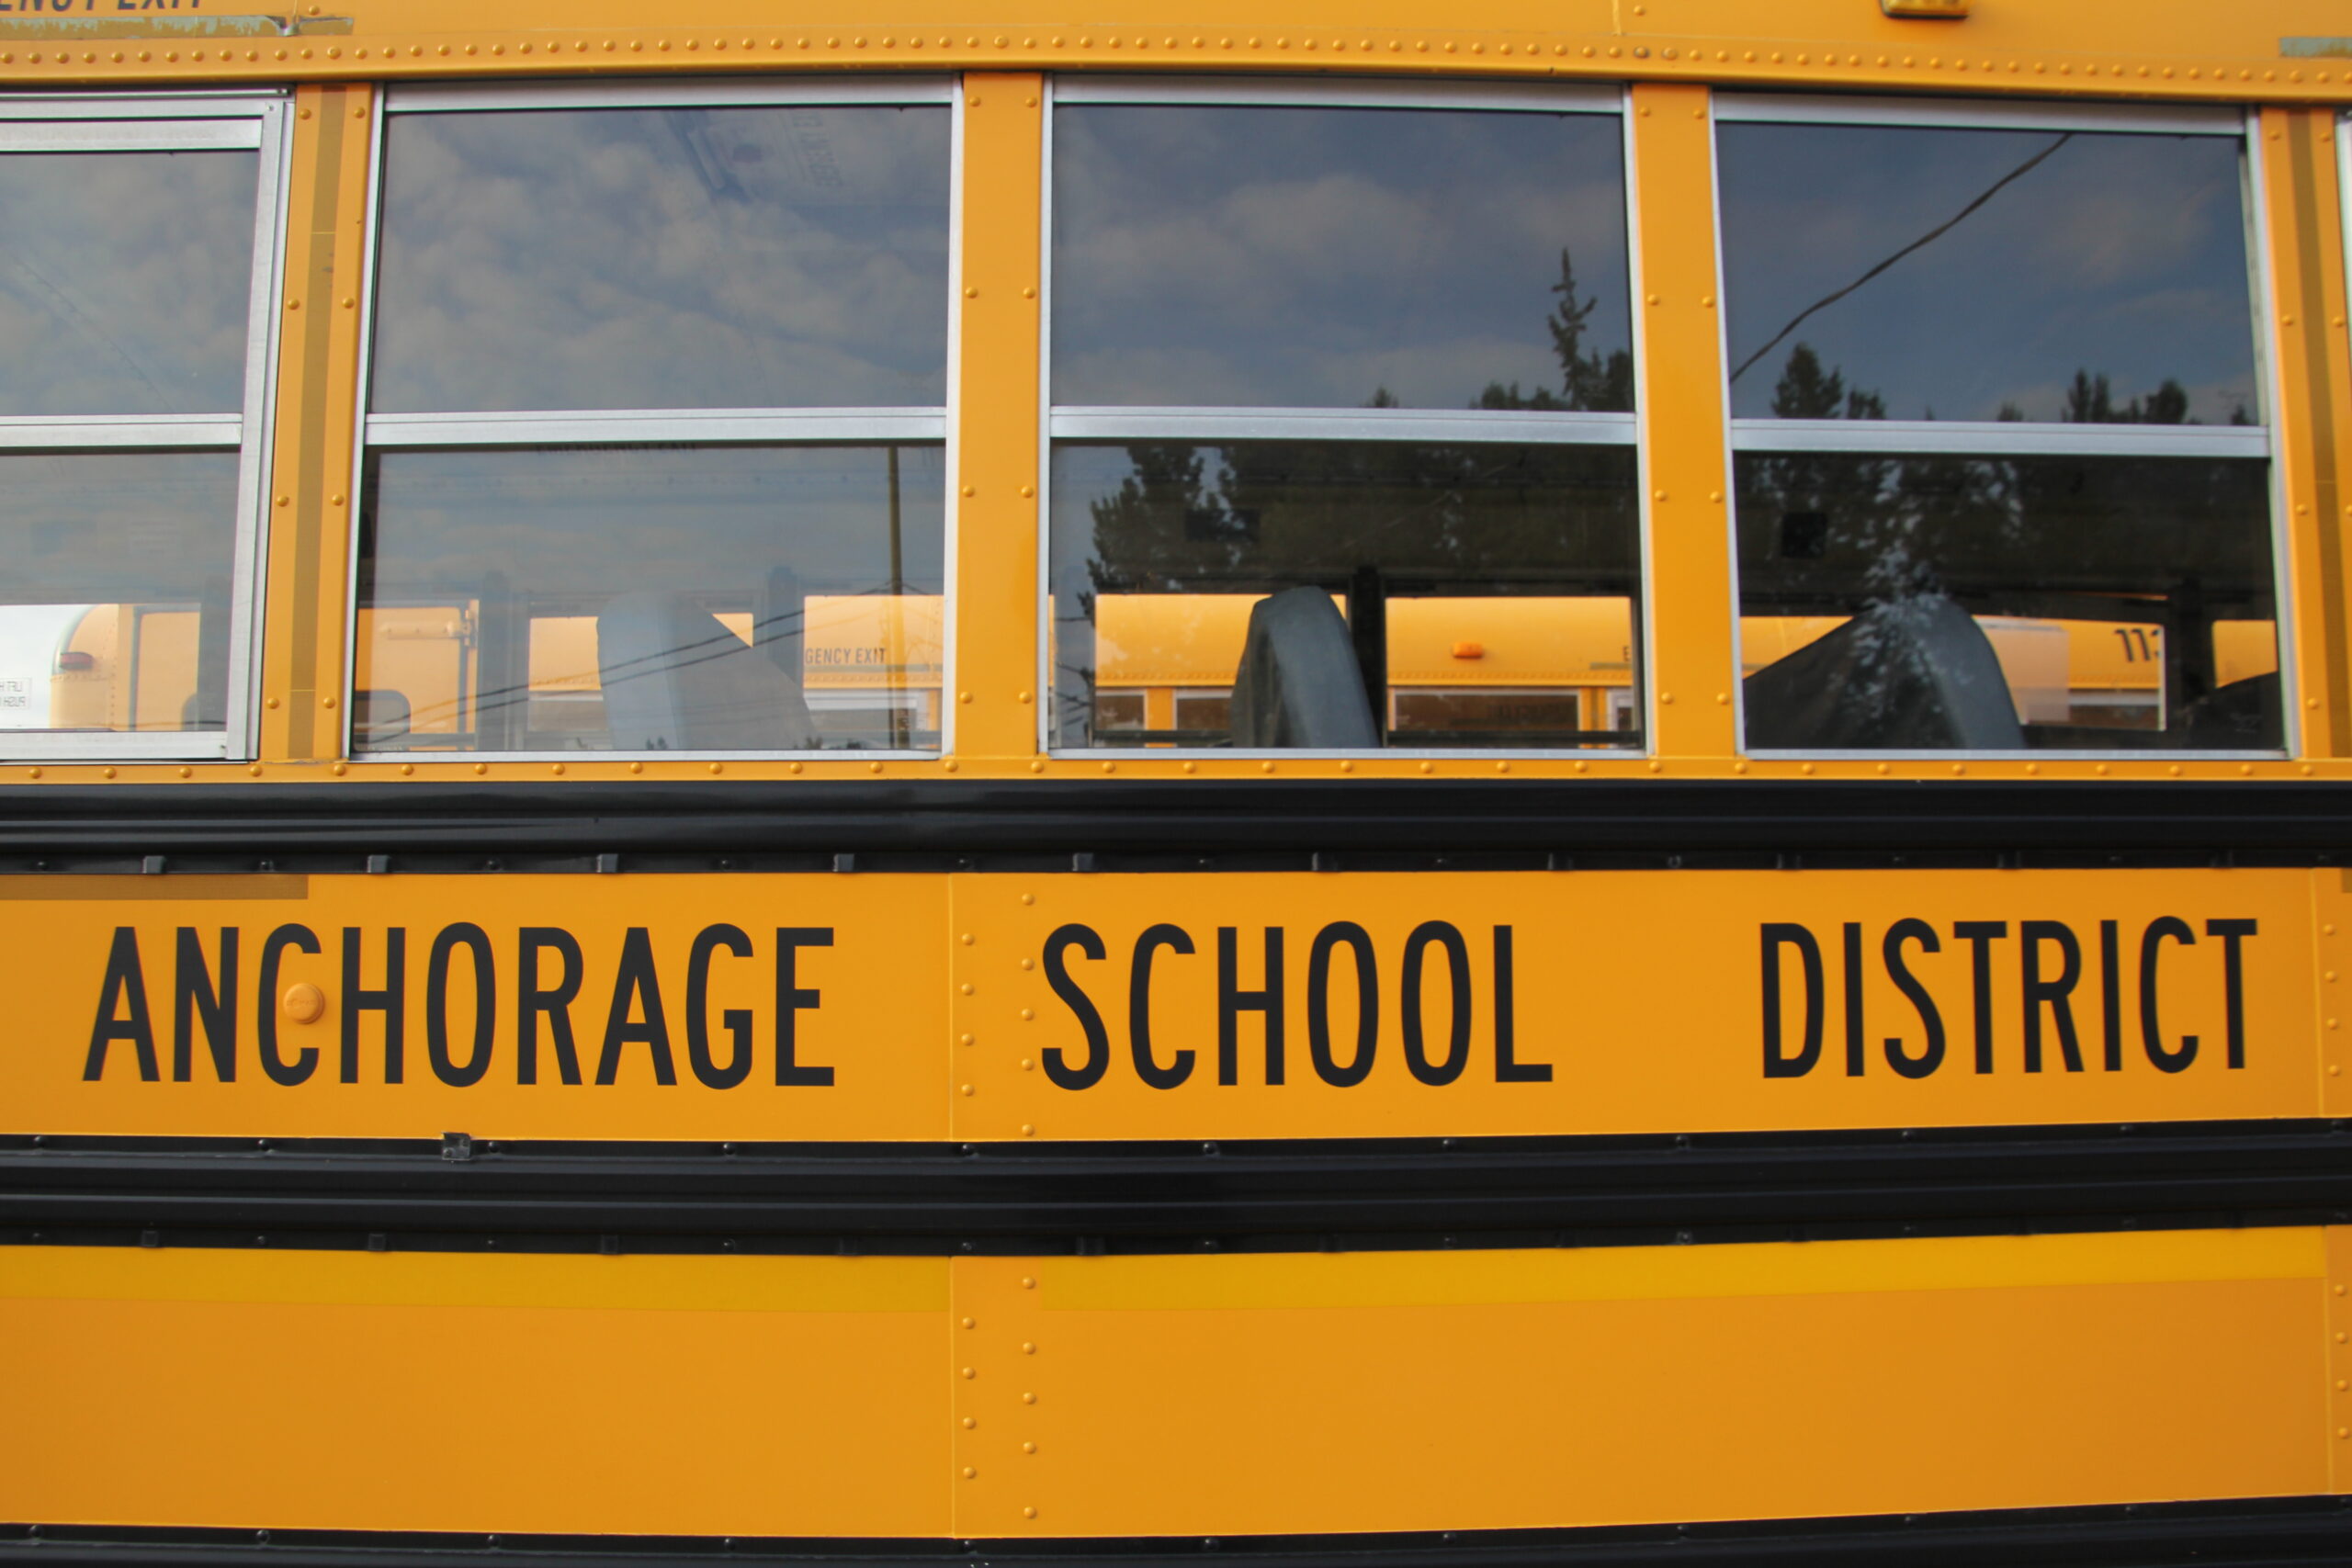 The side of a yellow school bus that says "Anchorage School District"